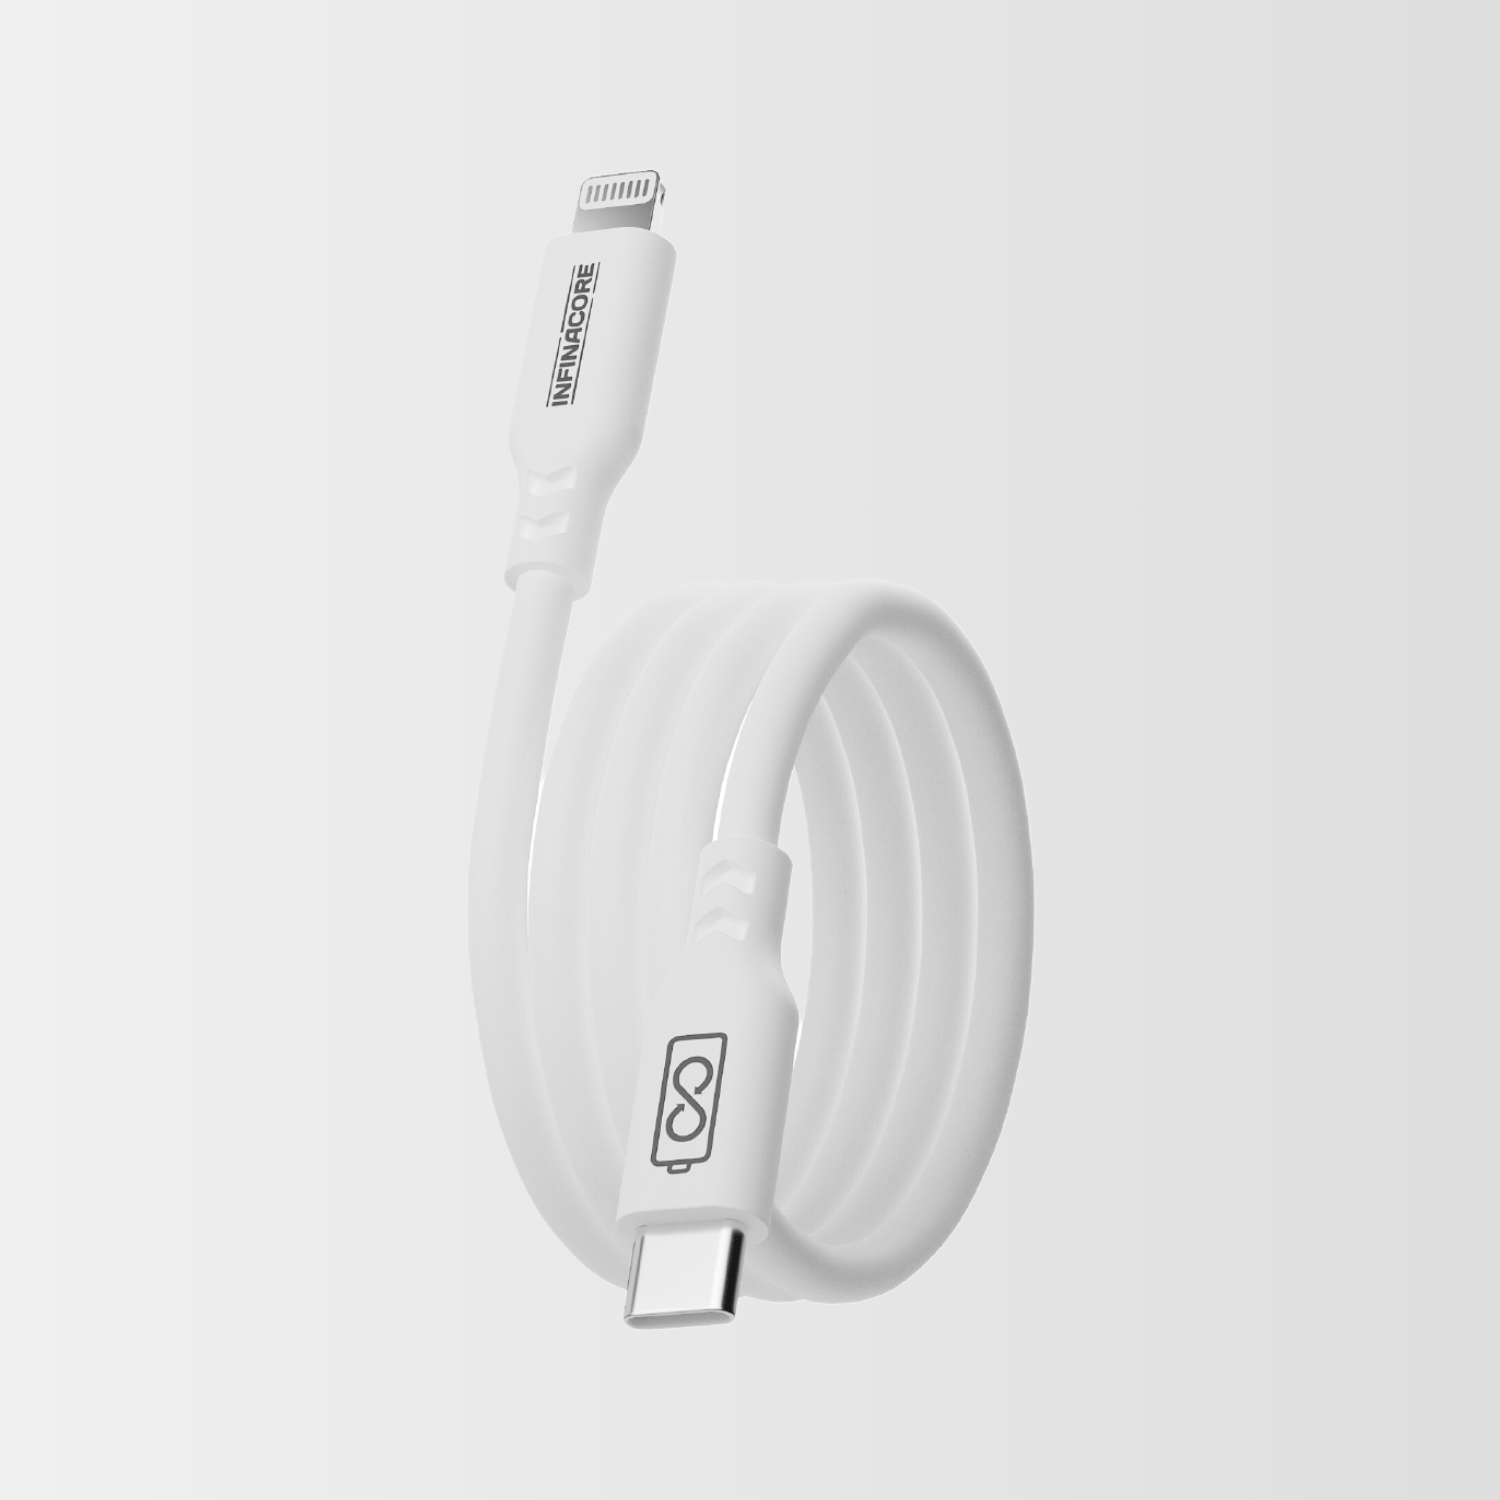 Silicone Lightning Charging Cable 60W for iPhone, iPad - InfinaCore®